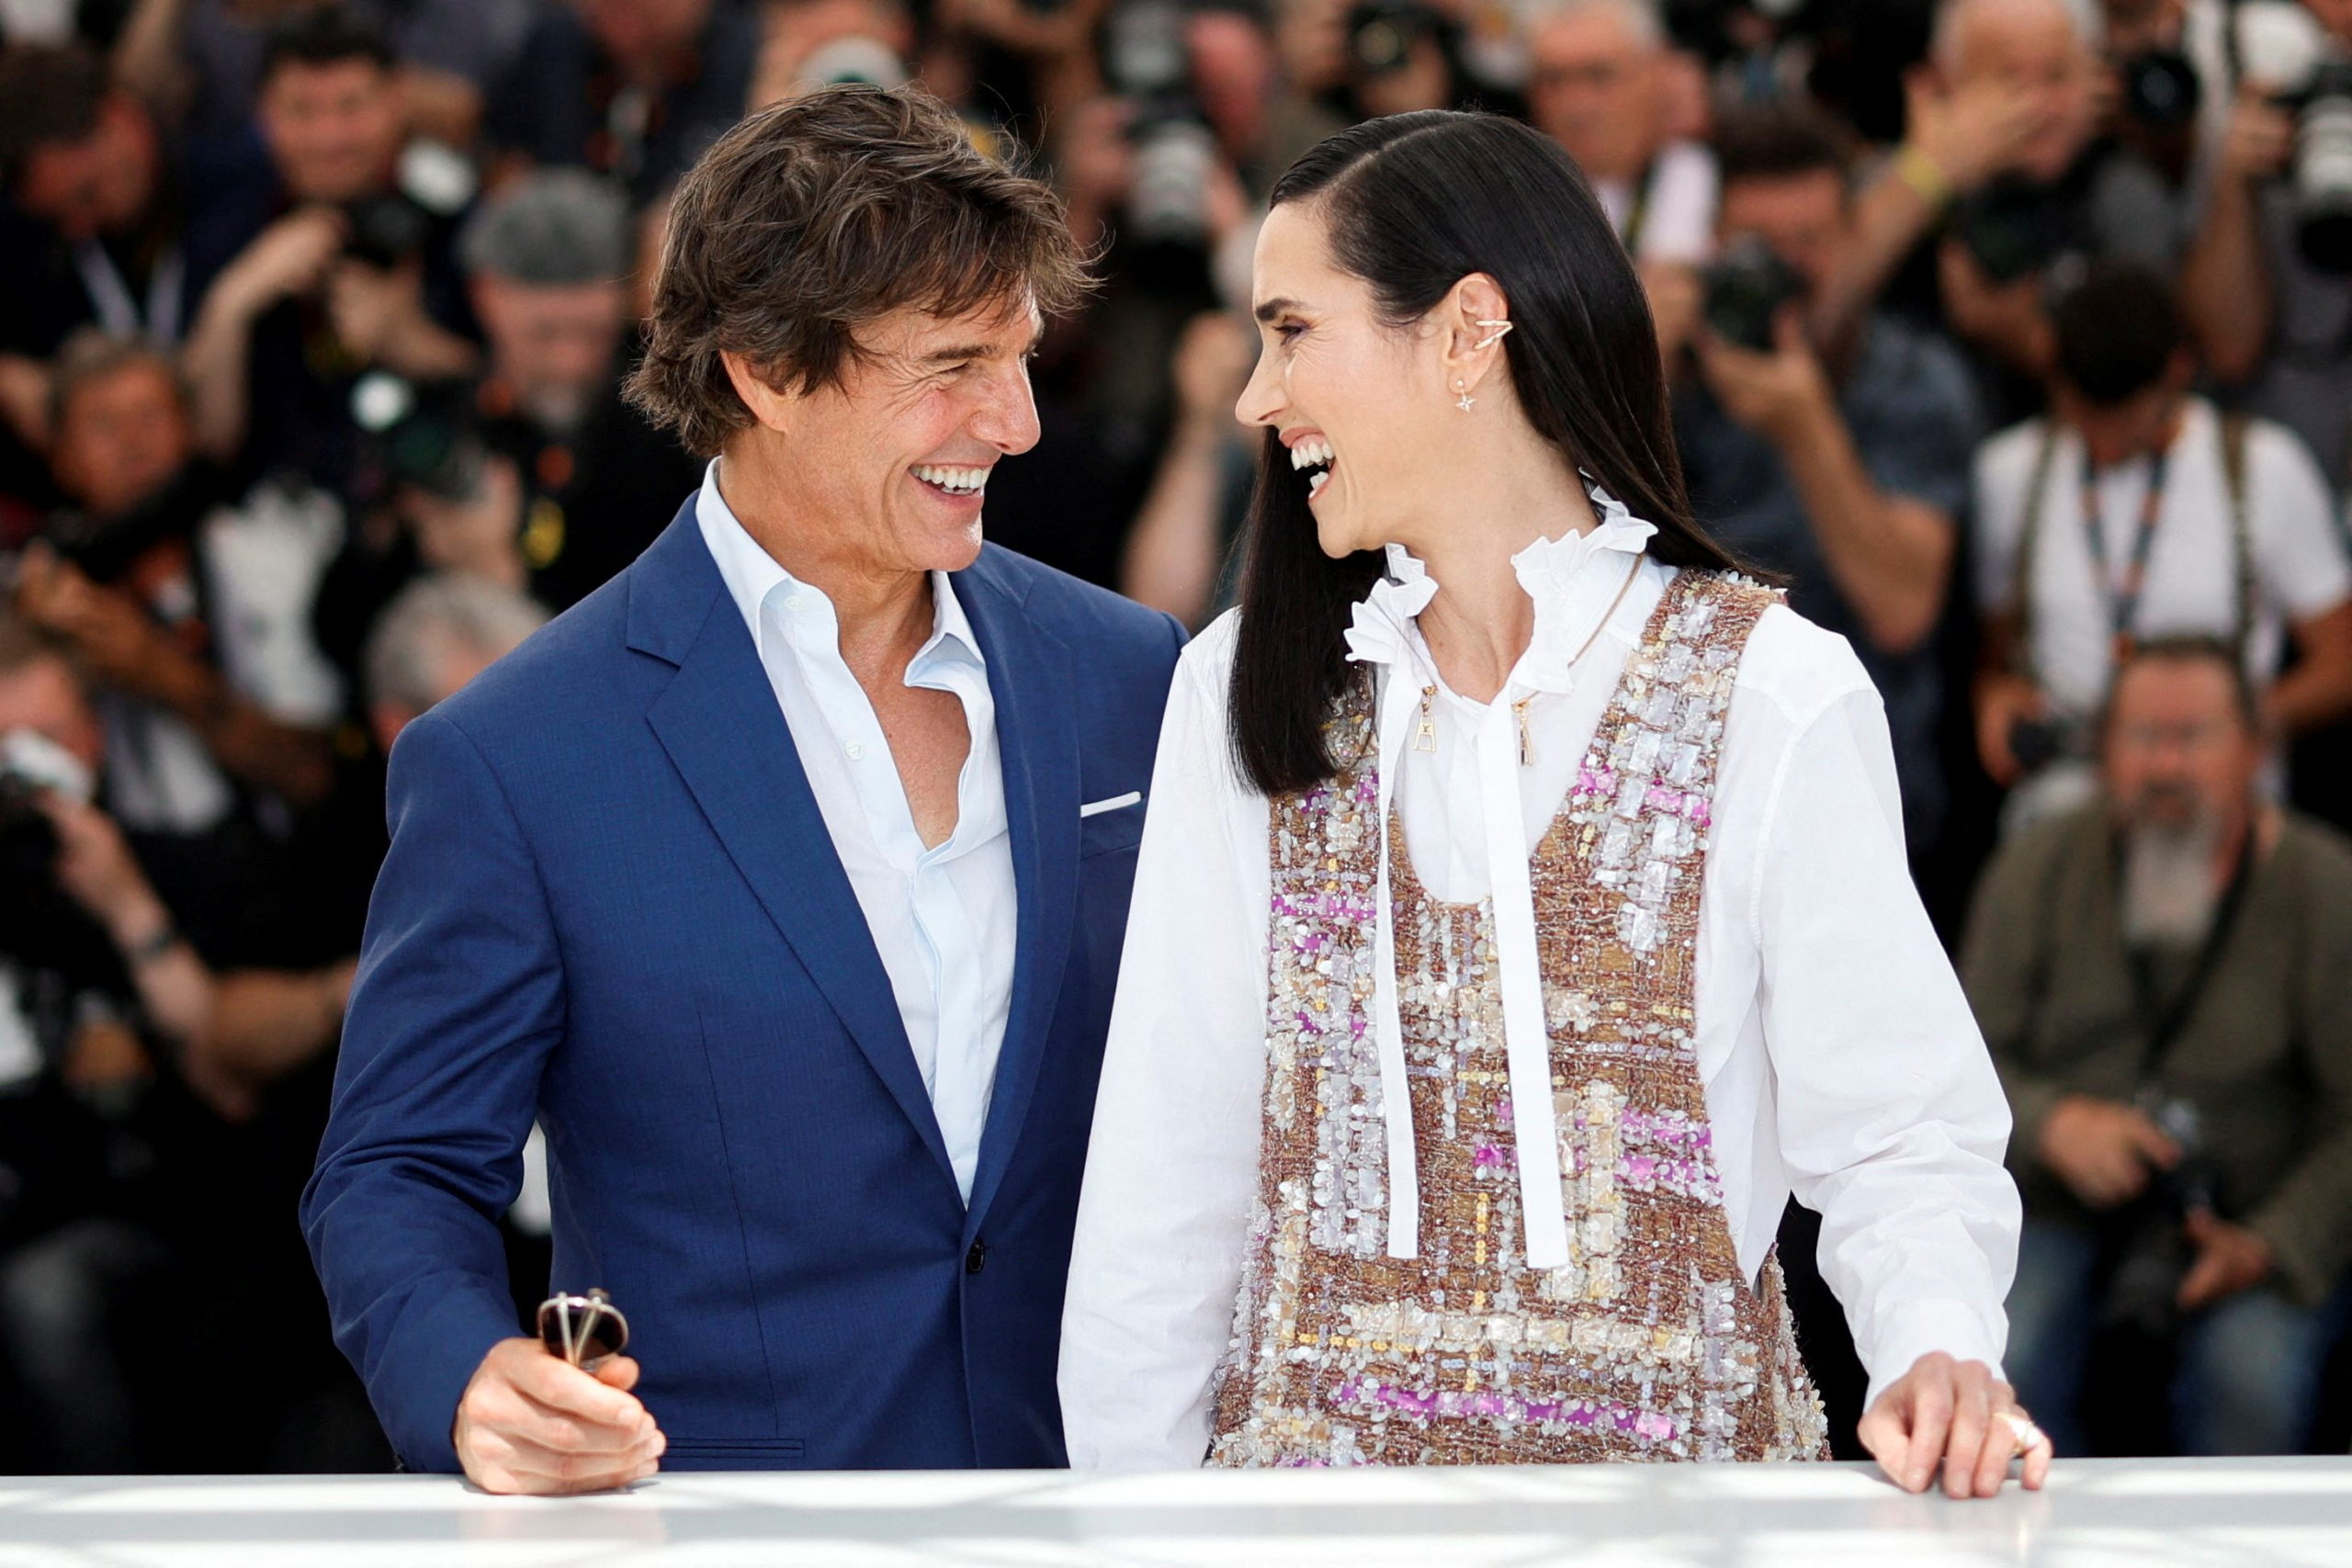 The 75th Cannes Film Festival - Photocall for the film "Top Gun: Maverick" Out of Competition - Cannes, France, May 18, 2022. Cast members Tom Cruise and Jennifer Connelly pose. REUTERS/Sarah Meyssonnier